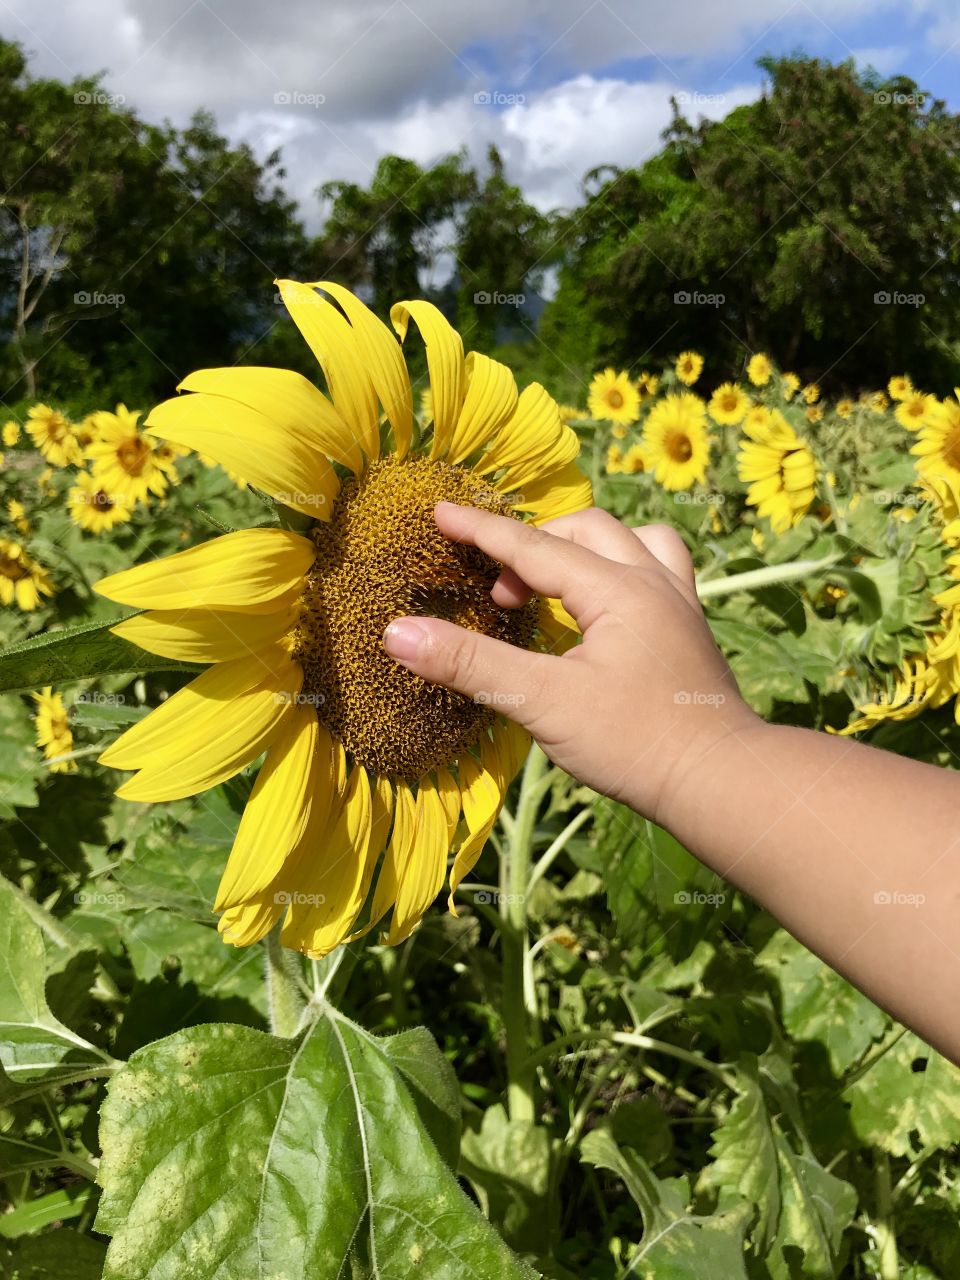 First time touching a flower :)